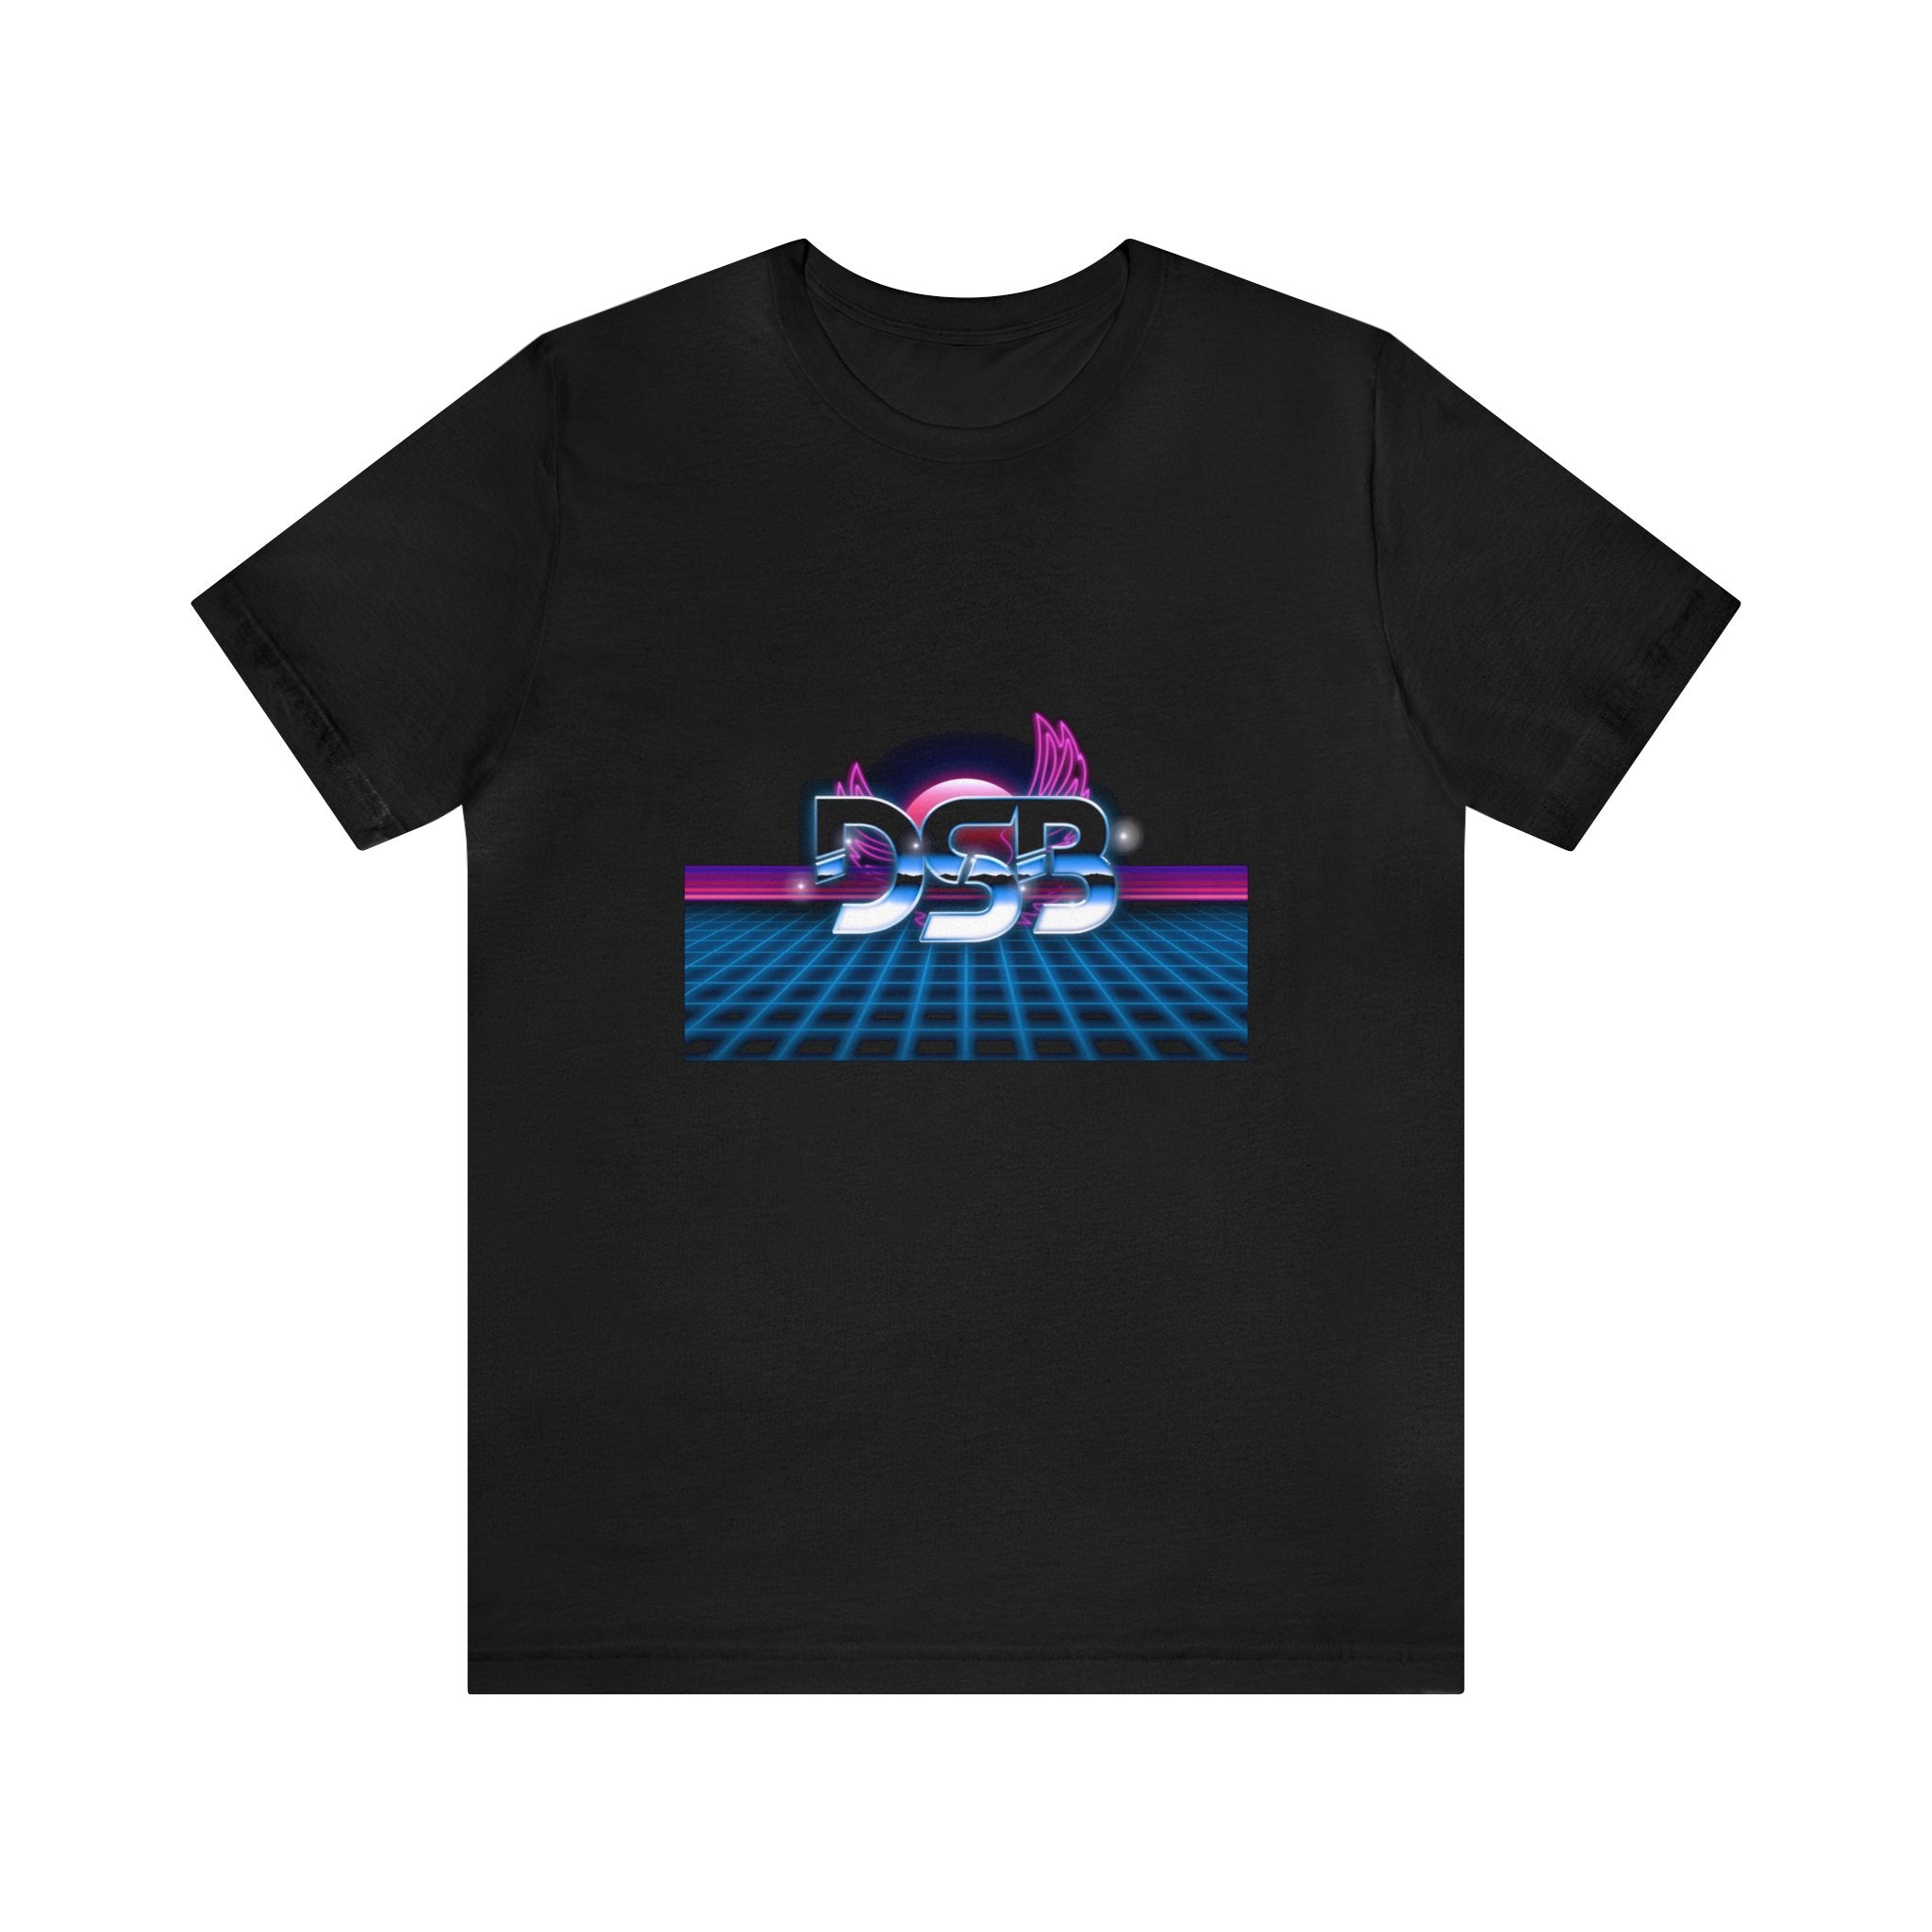 Copy of DSB Synthwave Logo T-Shirt